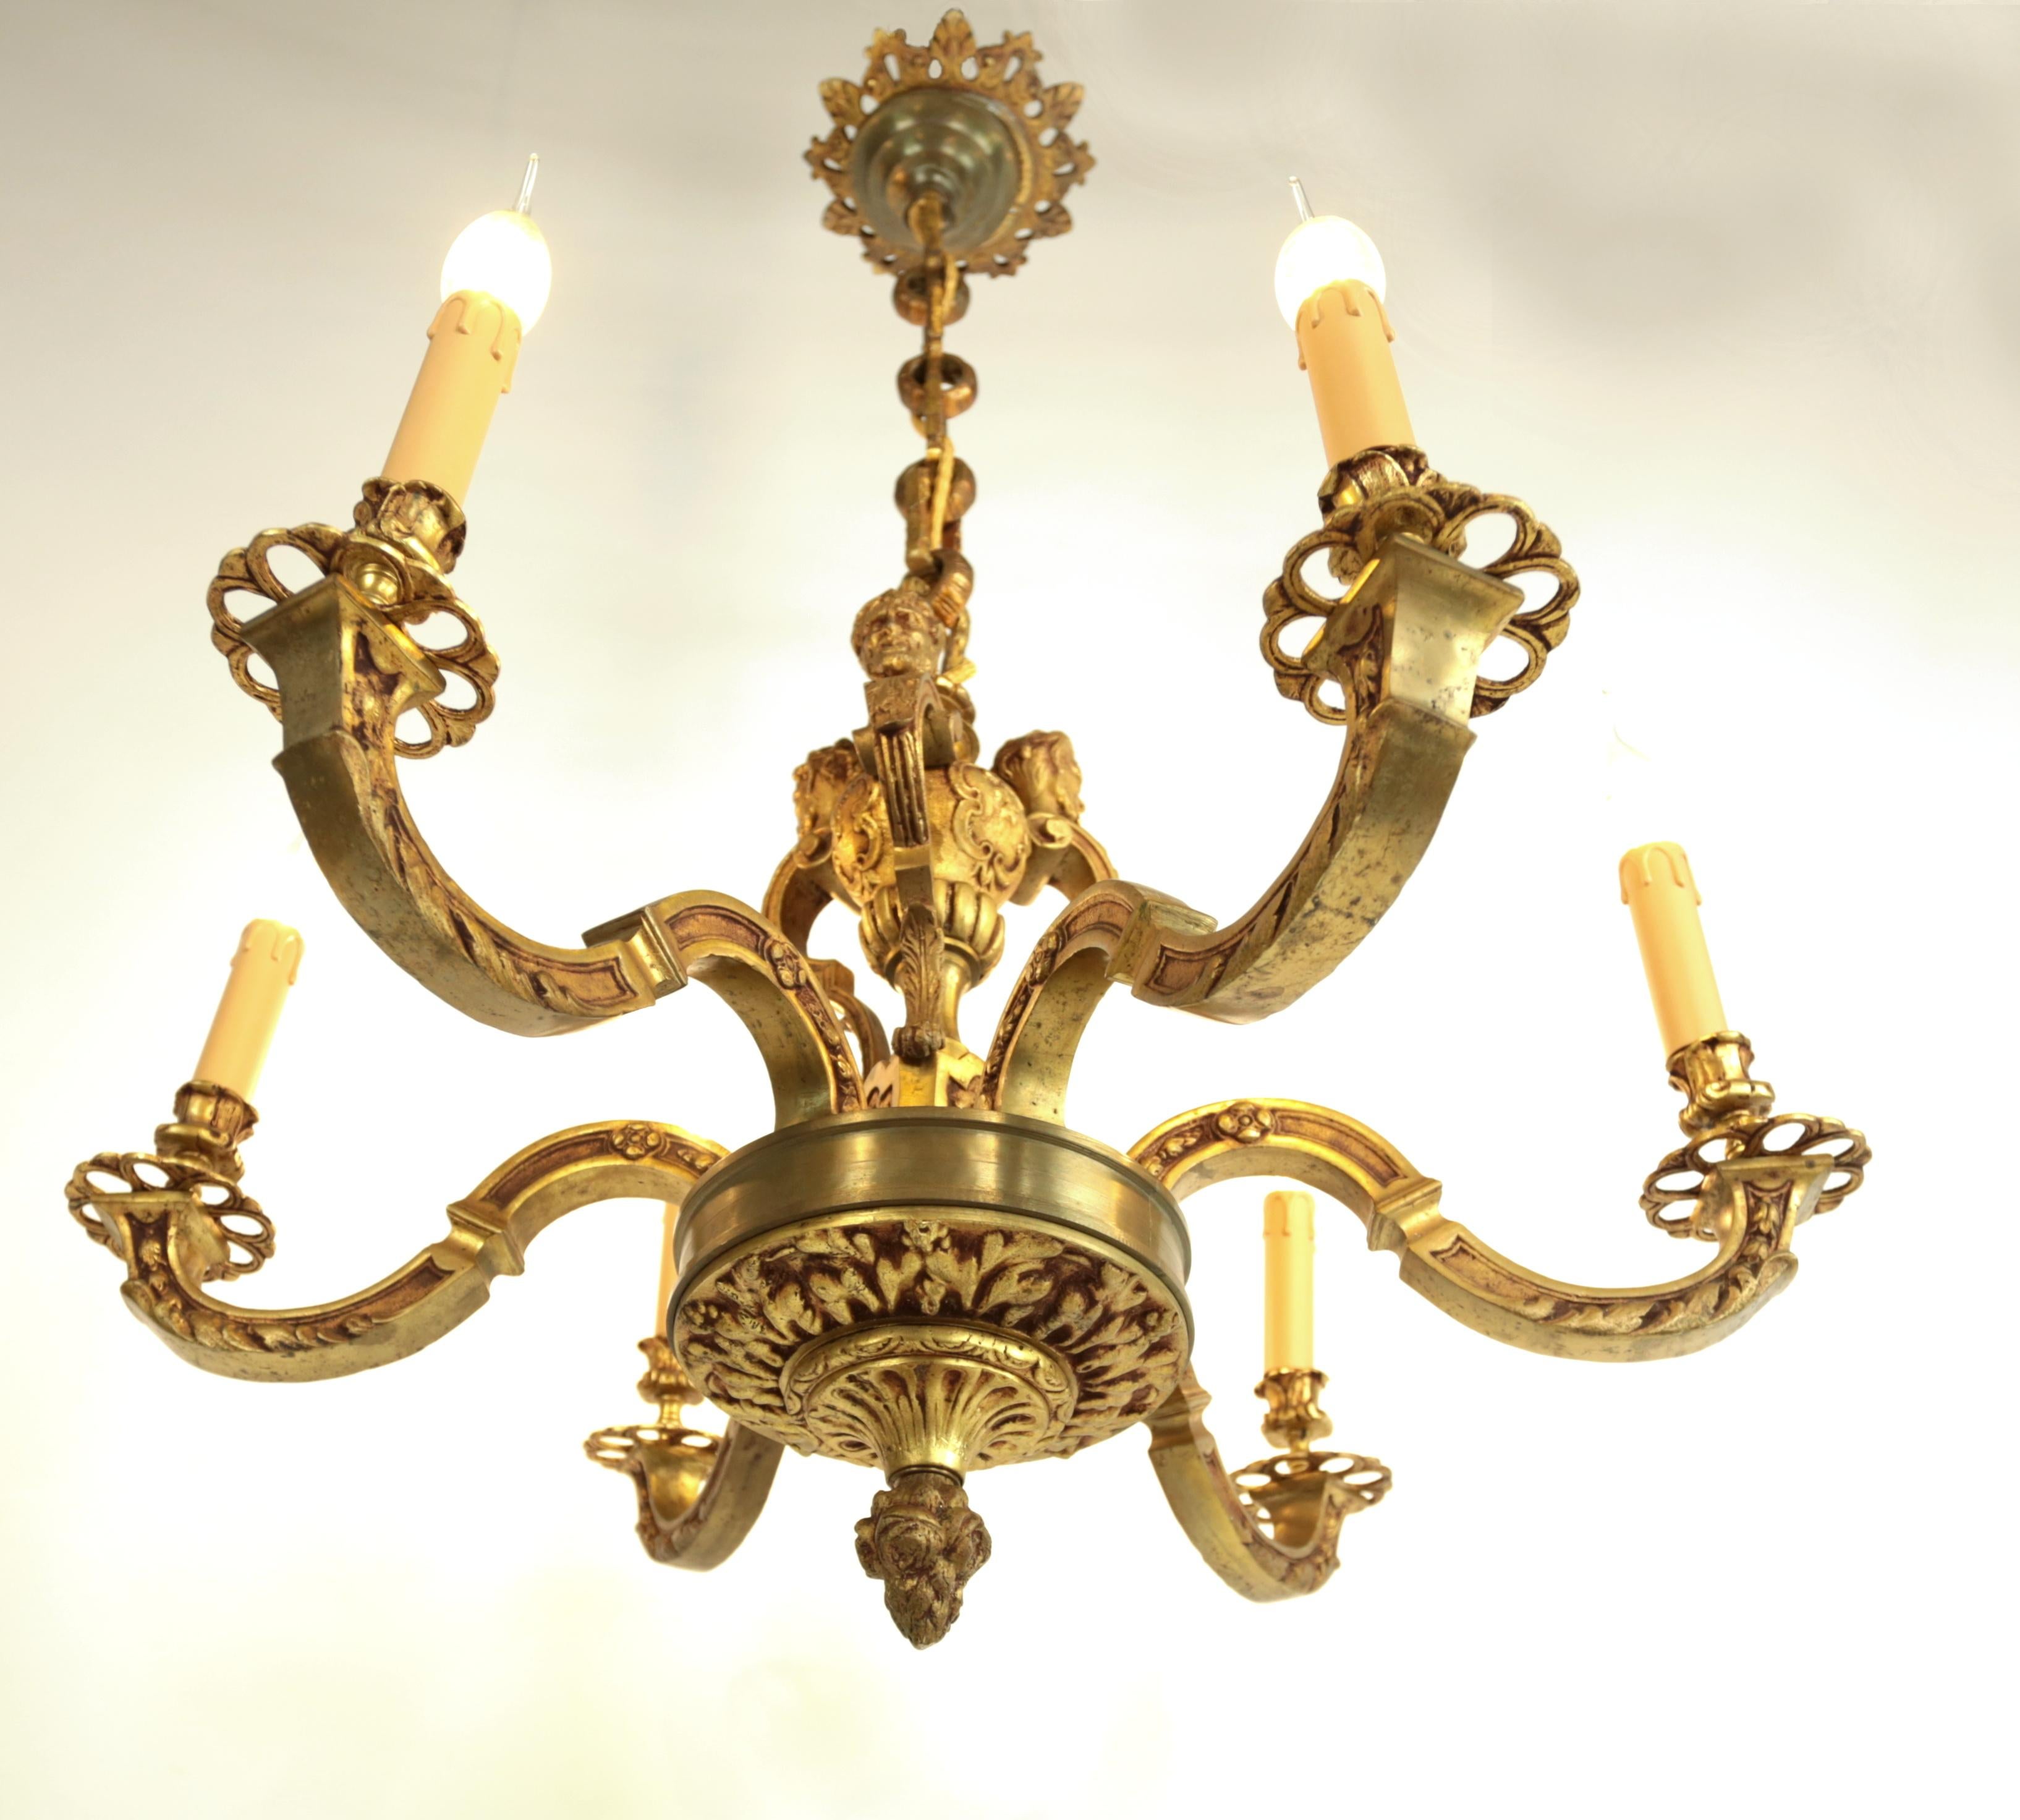 Massive Mazarin bronze chandelier

A heavy six-armed bronze chandelier in the style of Louis XIV. Elaborated in detail. The chandelier was made in France, probably by a workshop in Avignon. Each arm is for one classic candle bulb with an E14 socket